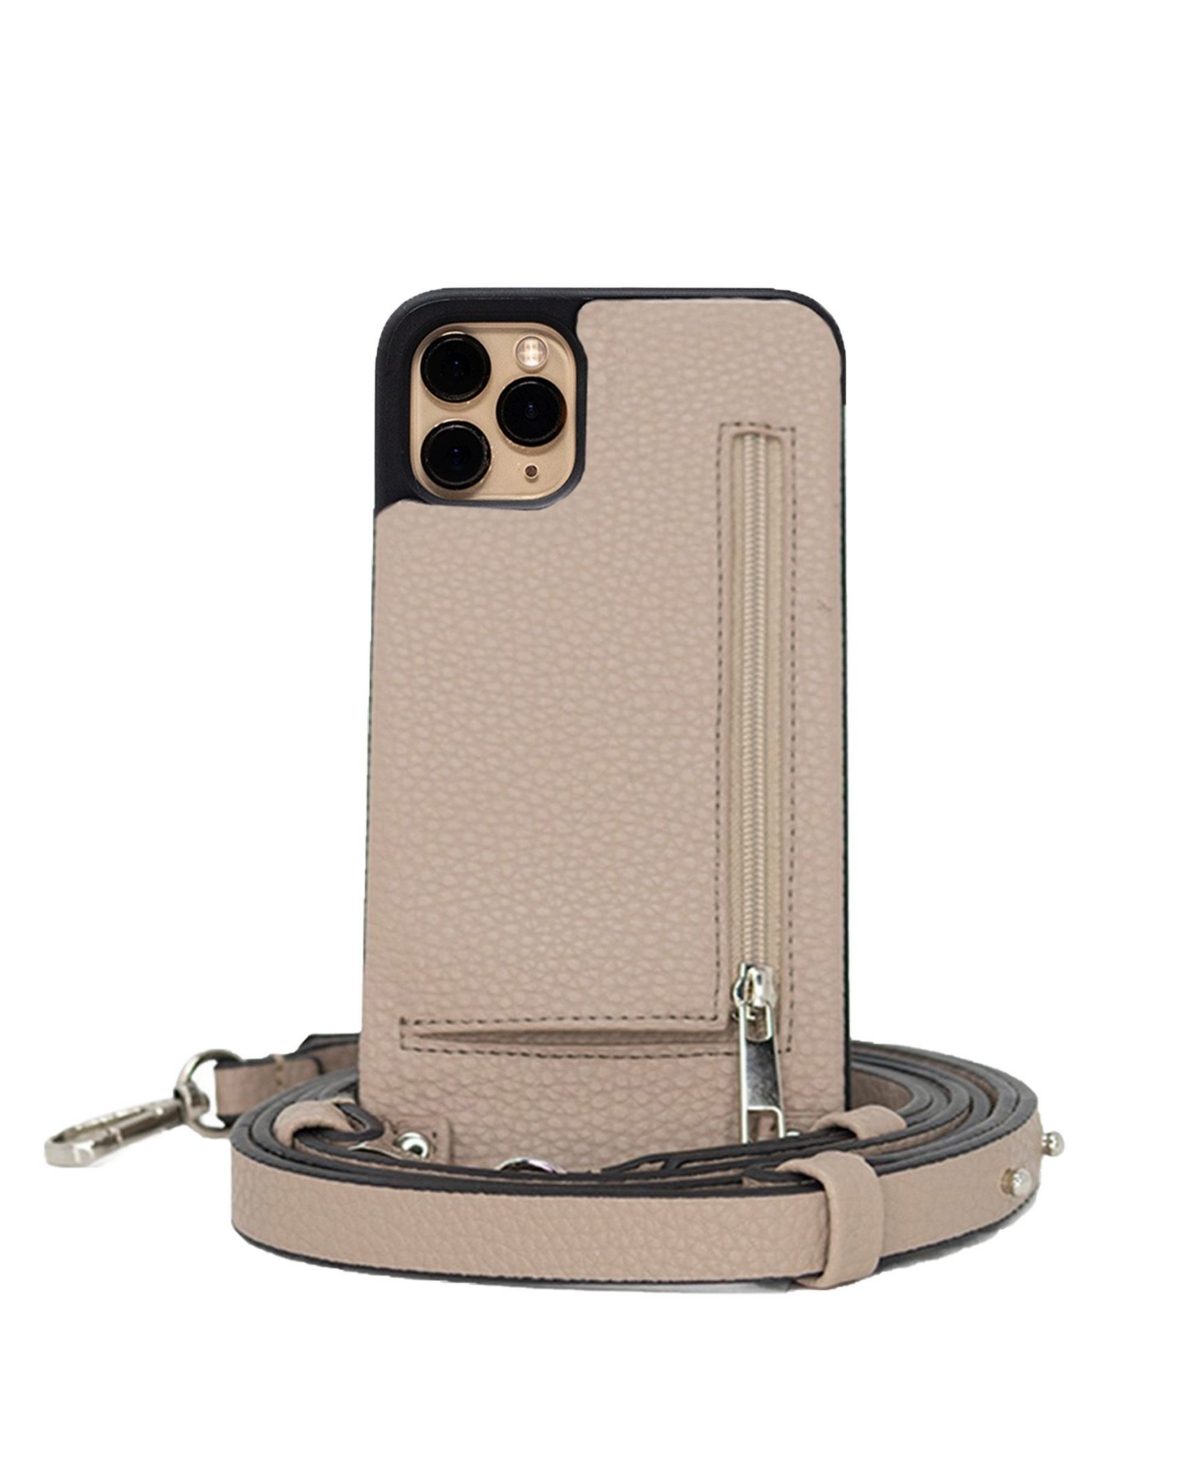 Hera Cases Iphone 11 Pro Case with Strap Wallet